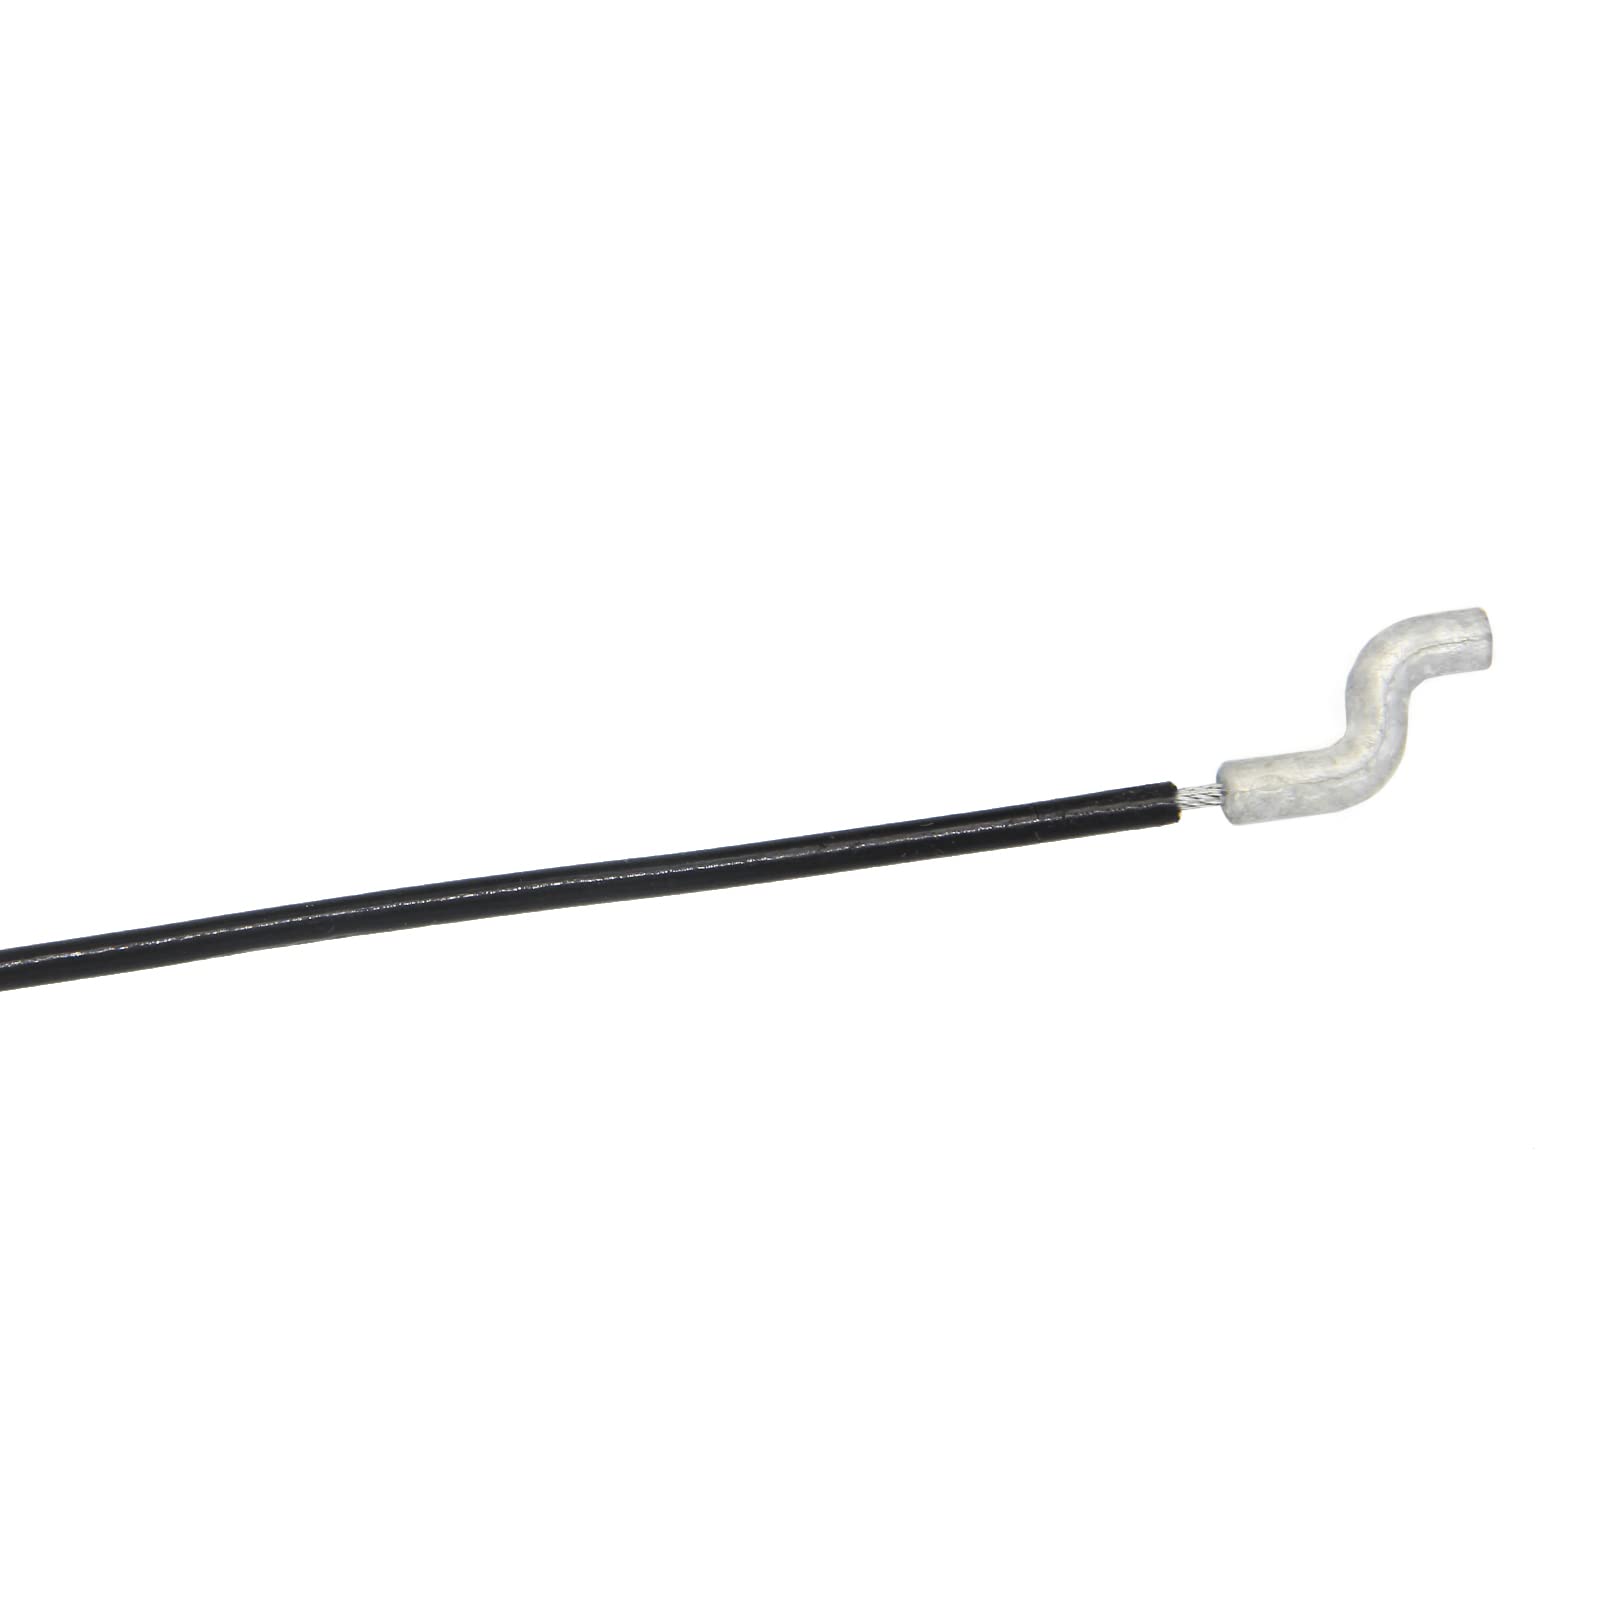 AILEETE 1501122MA Front Drive Lower Cable for Murray Craftsman Snowblower Snow Thrower 313449MA 1501122 MT1501122MA